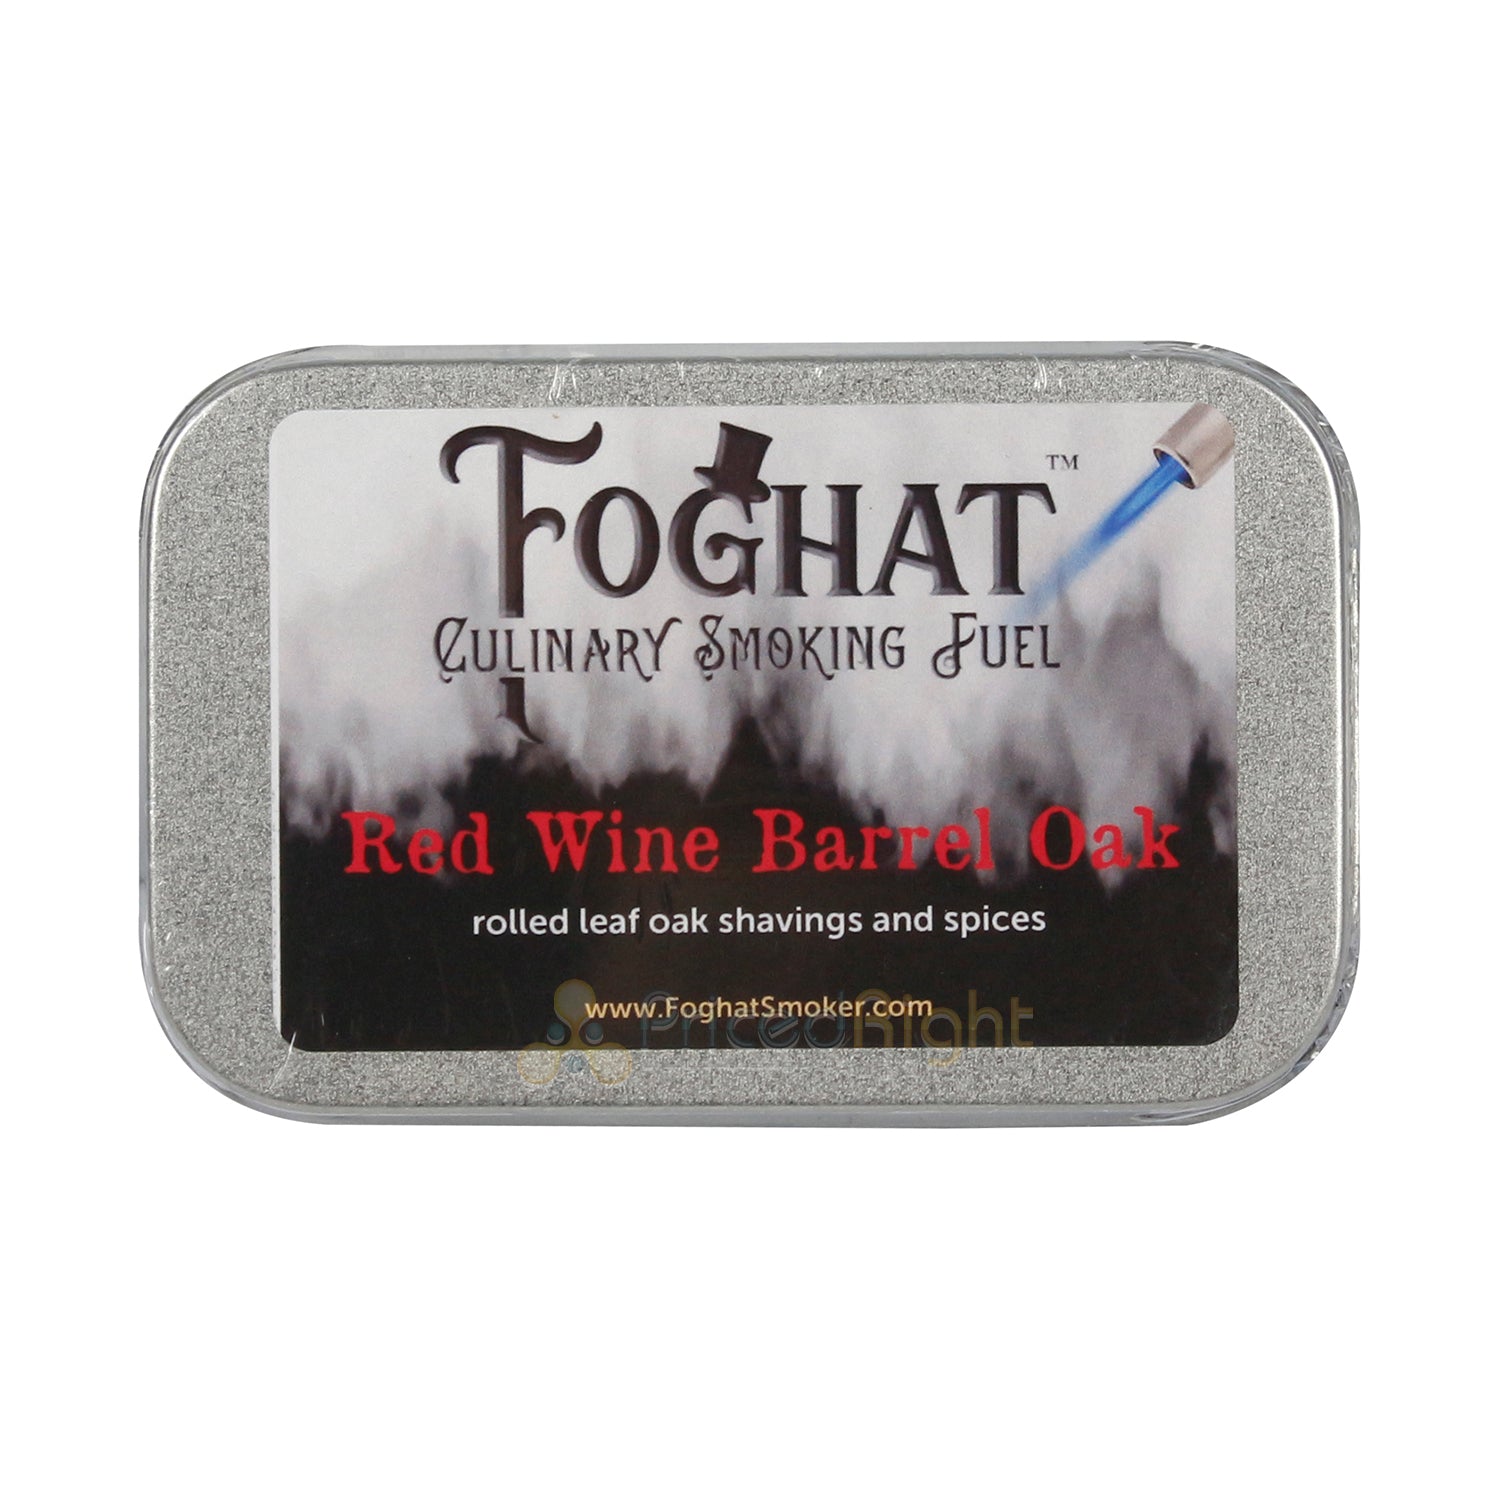 Foghat Culinary Smoking Fuel Aged Red Wine Barrel Oak W/ Spices All-Natural 4 oz